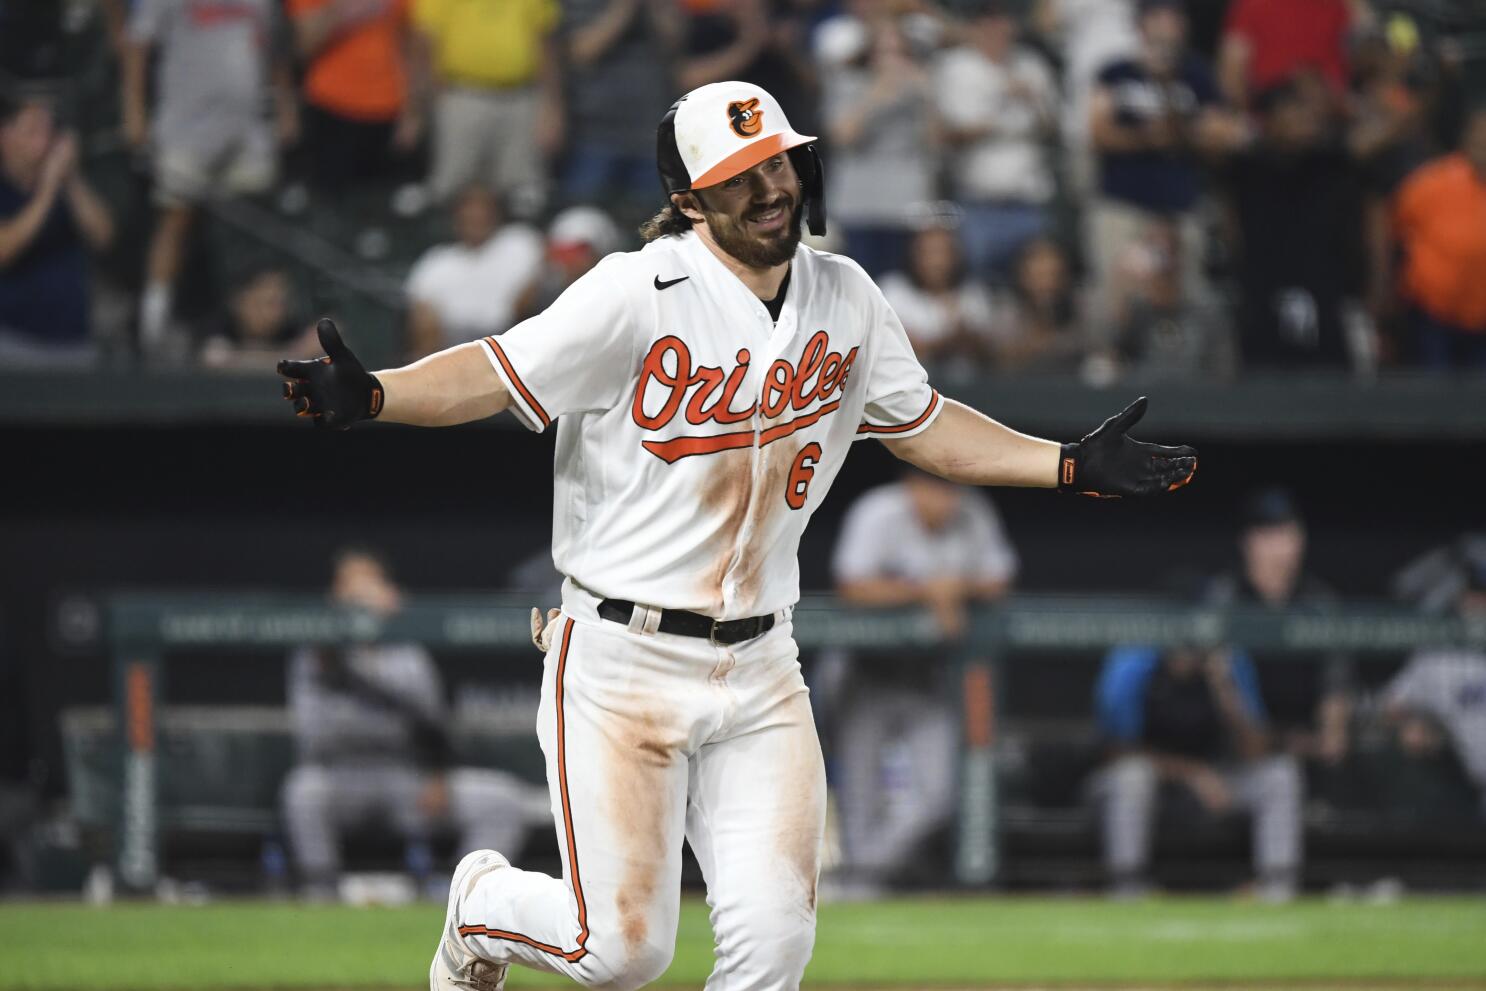 Mullins hits 3-run homer in 9th to lift Orioles to 8-7 win over Astros